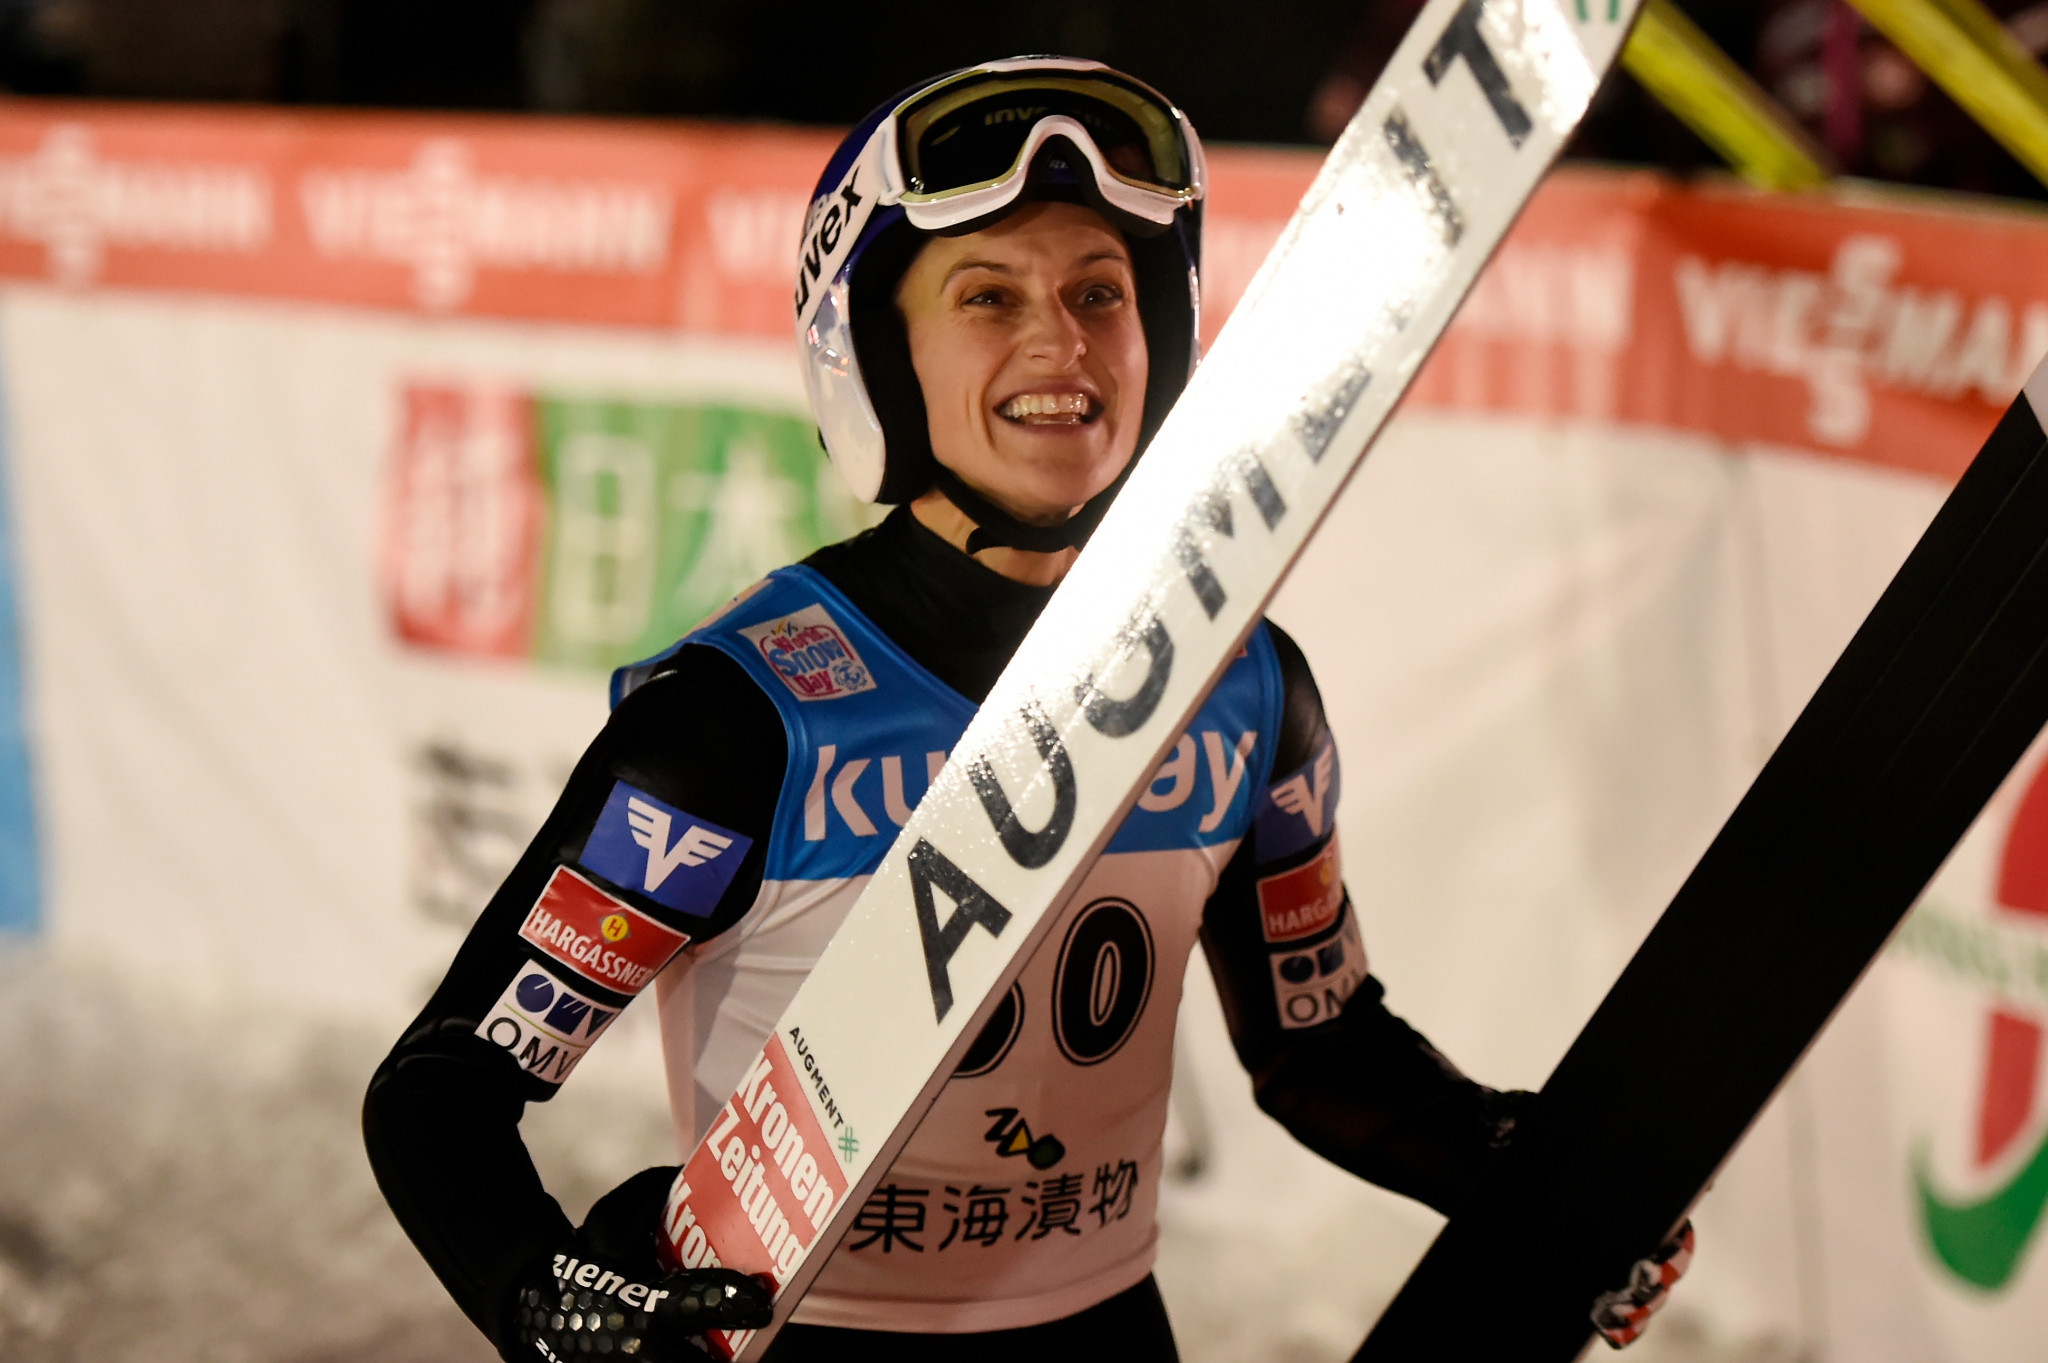 Eva Pinkelnig continued her remarkable run in Japan ©Getty Images